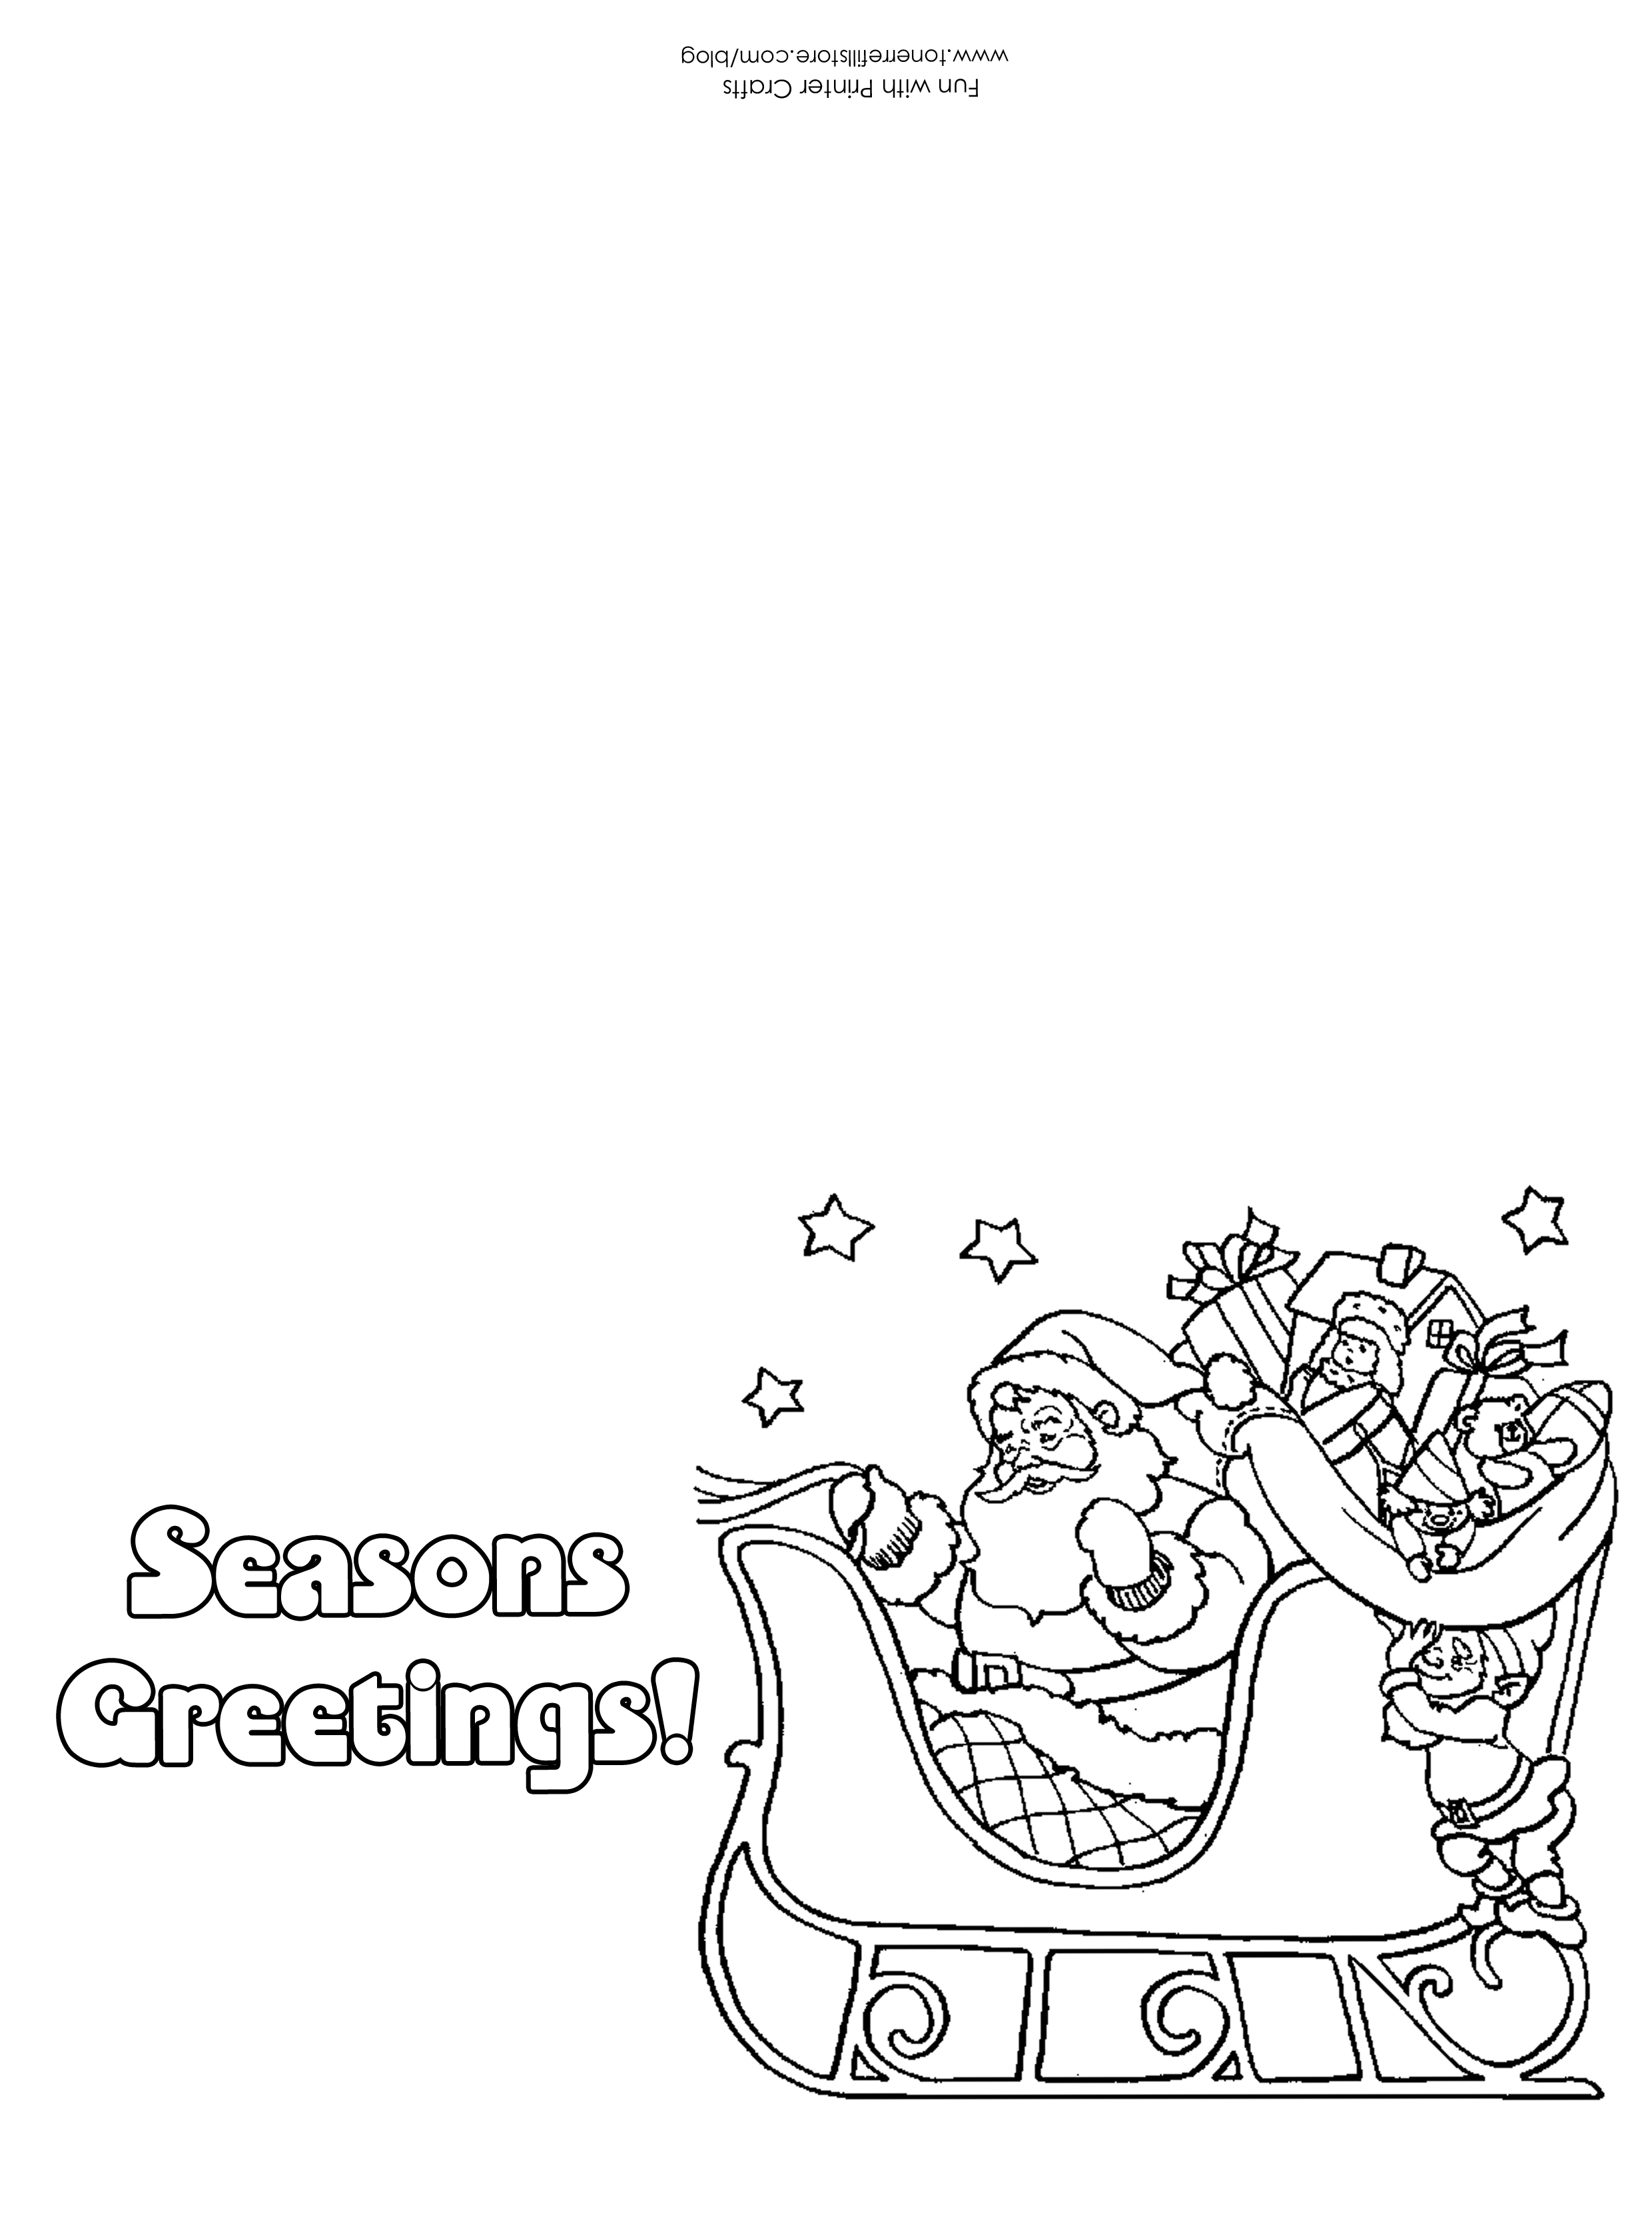 Christmas Printable Images Gallery Category Page 1 - printablee.com